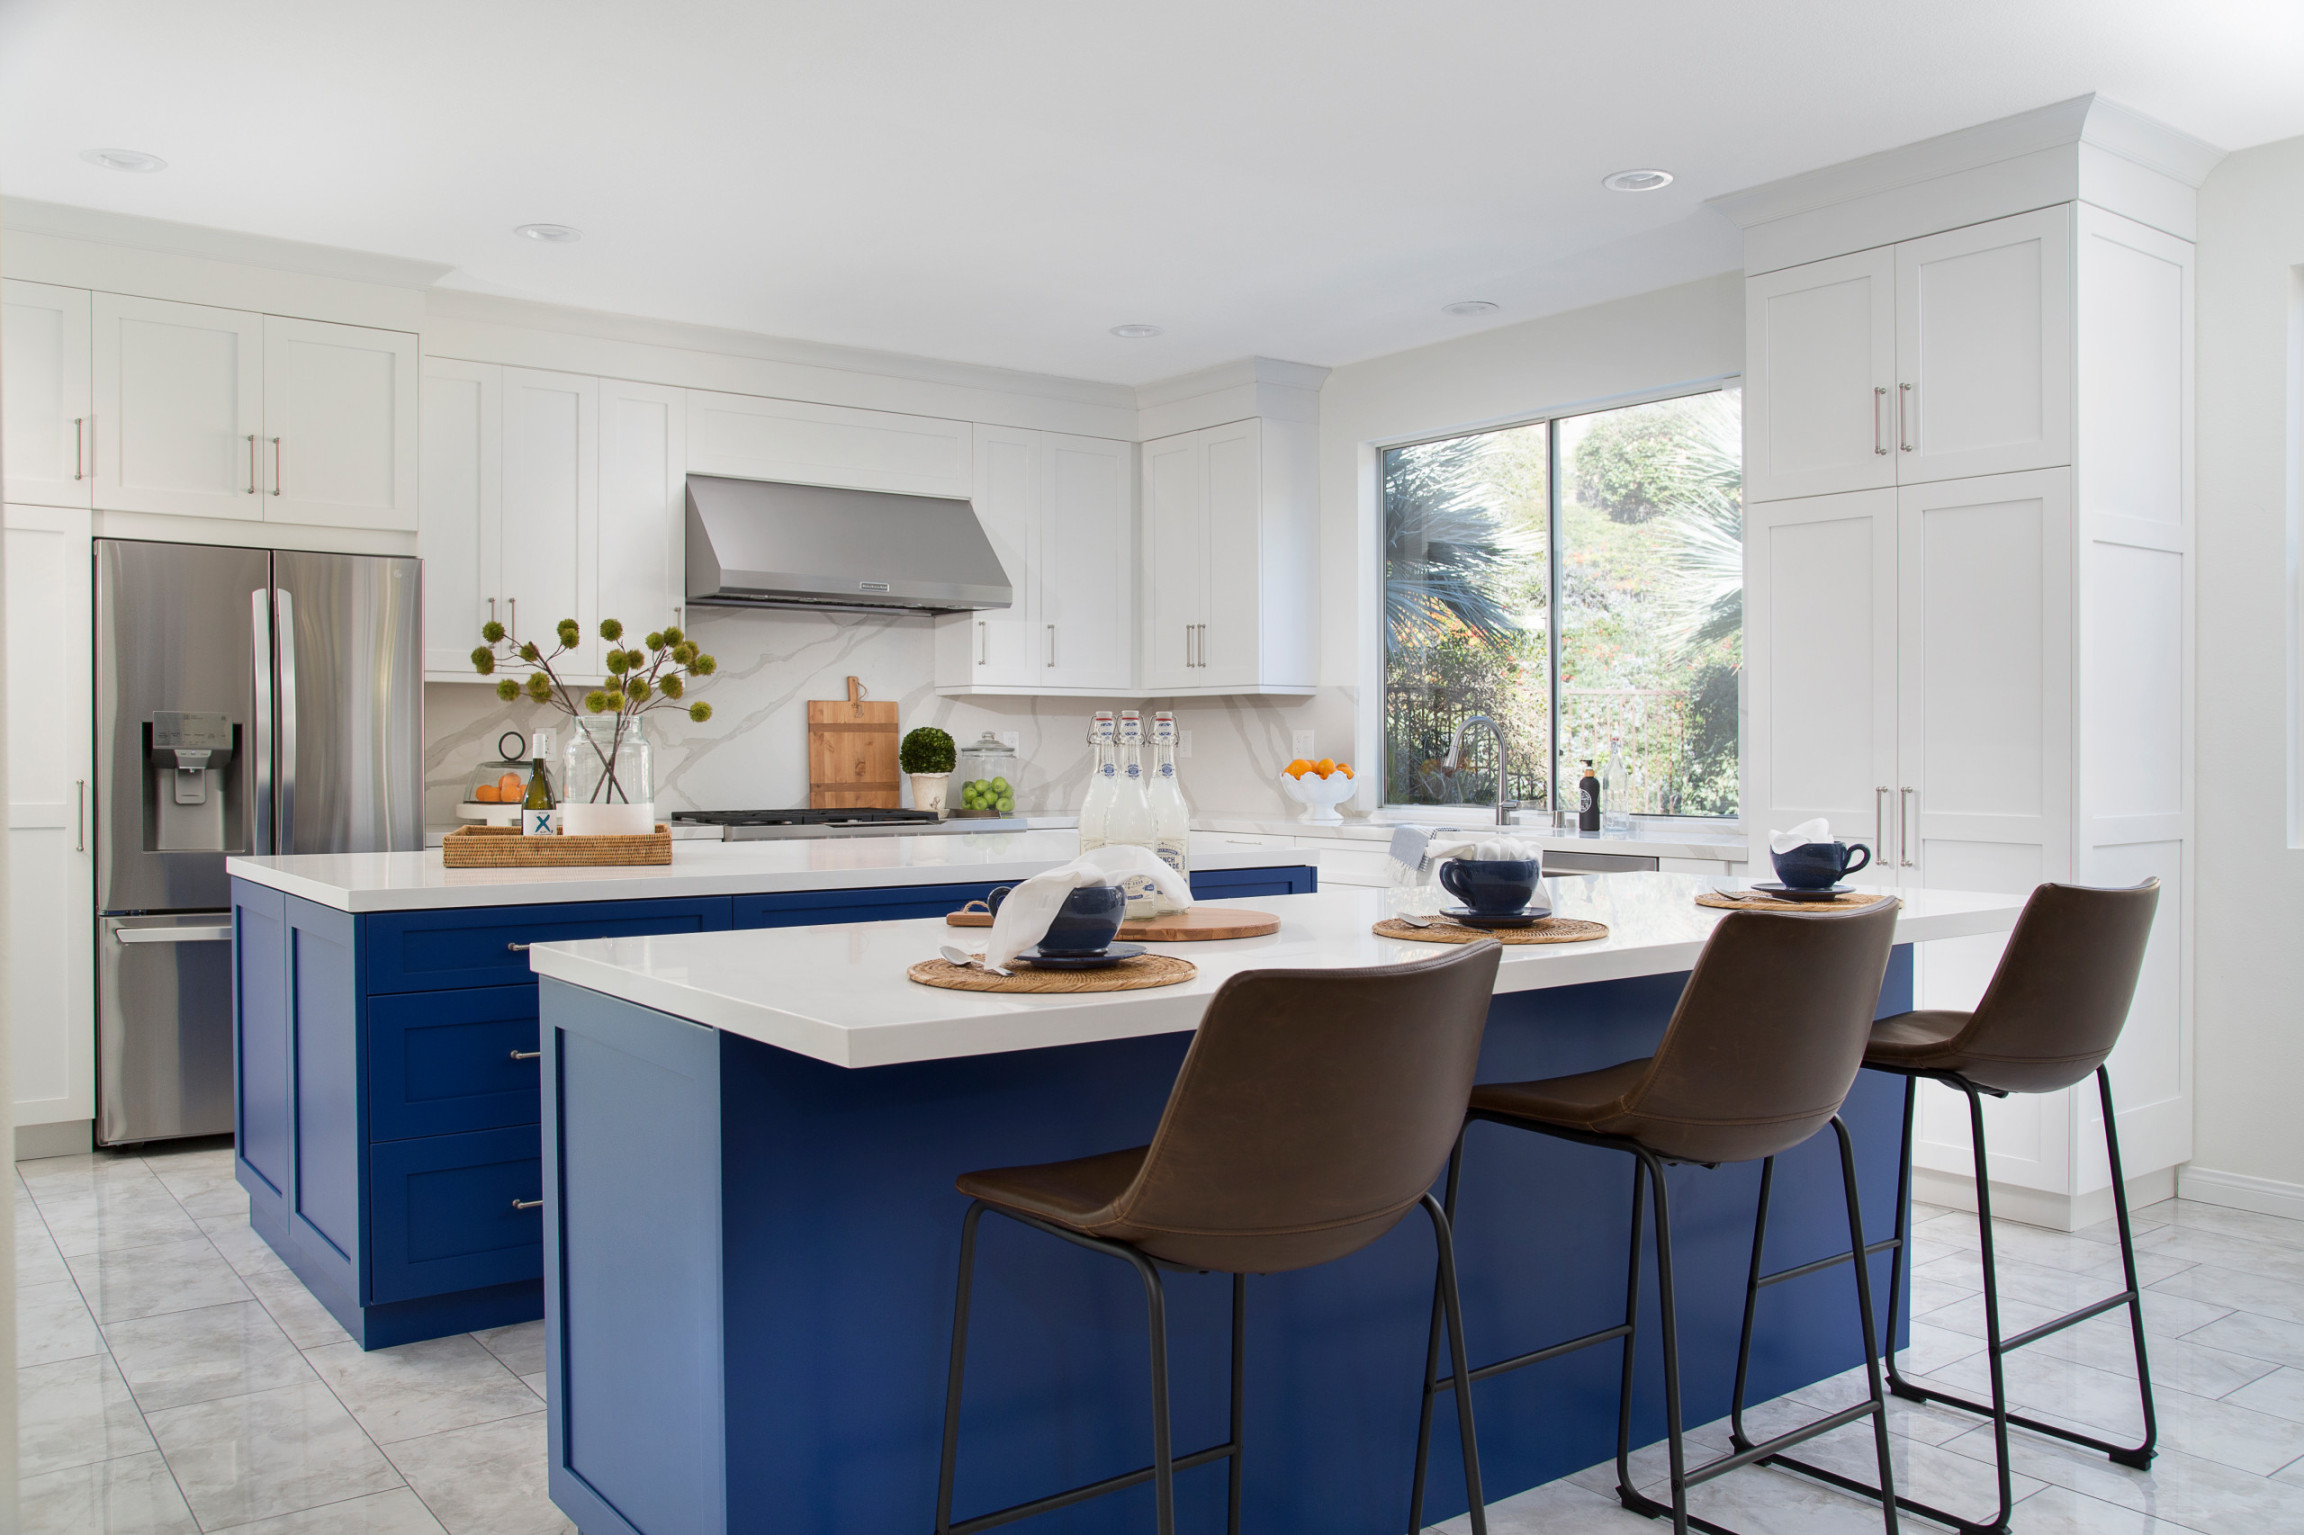 Beautiful Double Island Kitchen Pictures & Ideas  Houzz